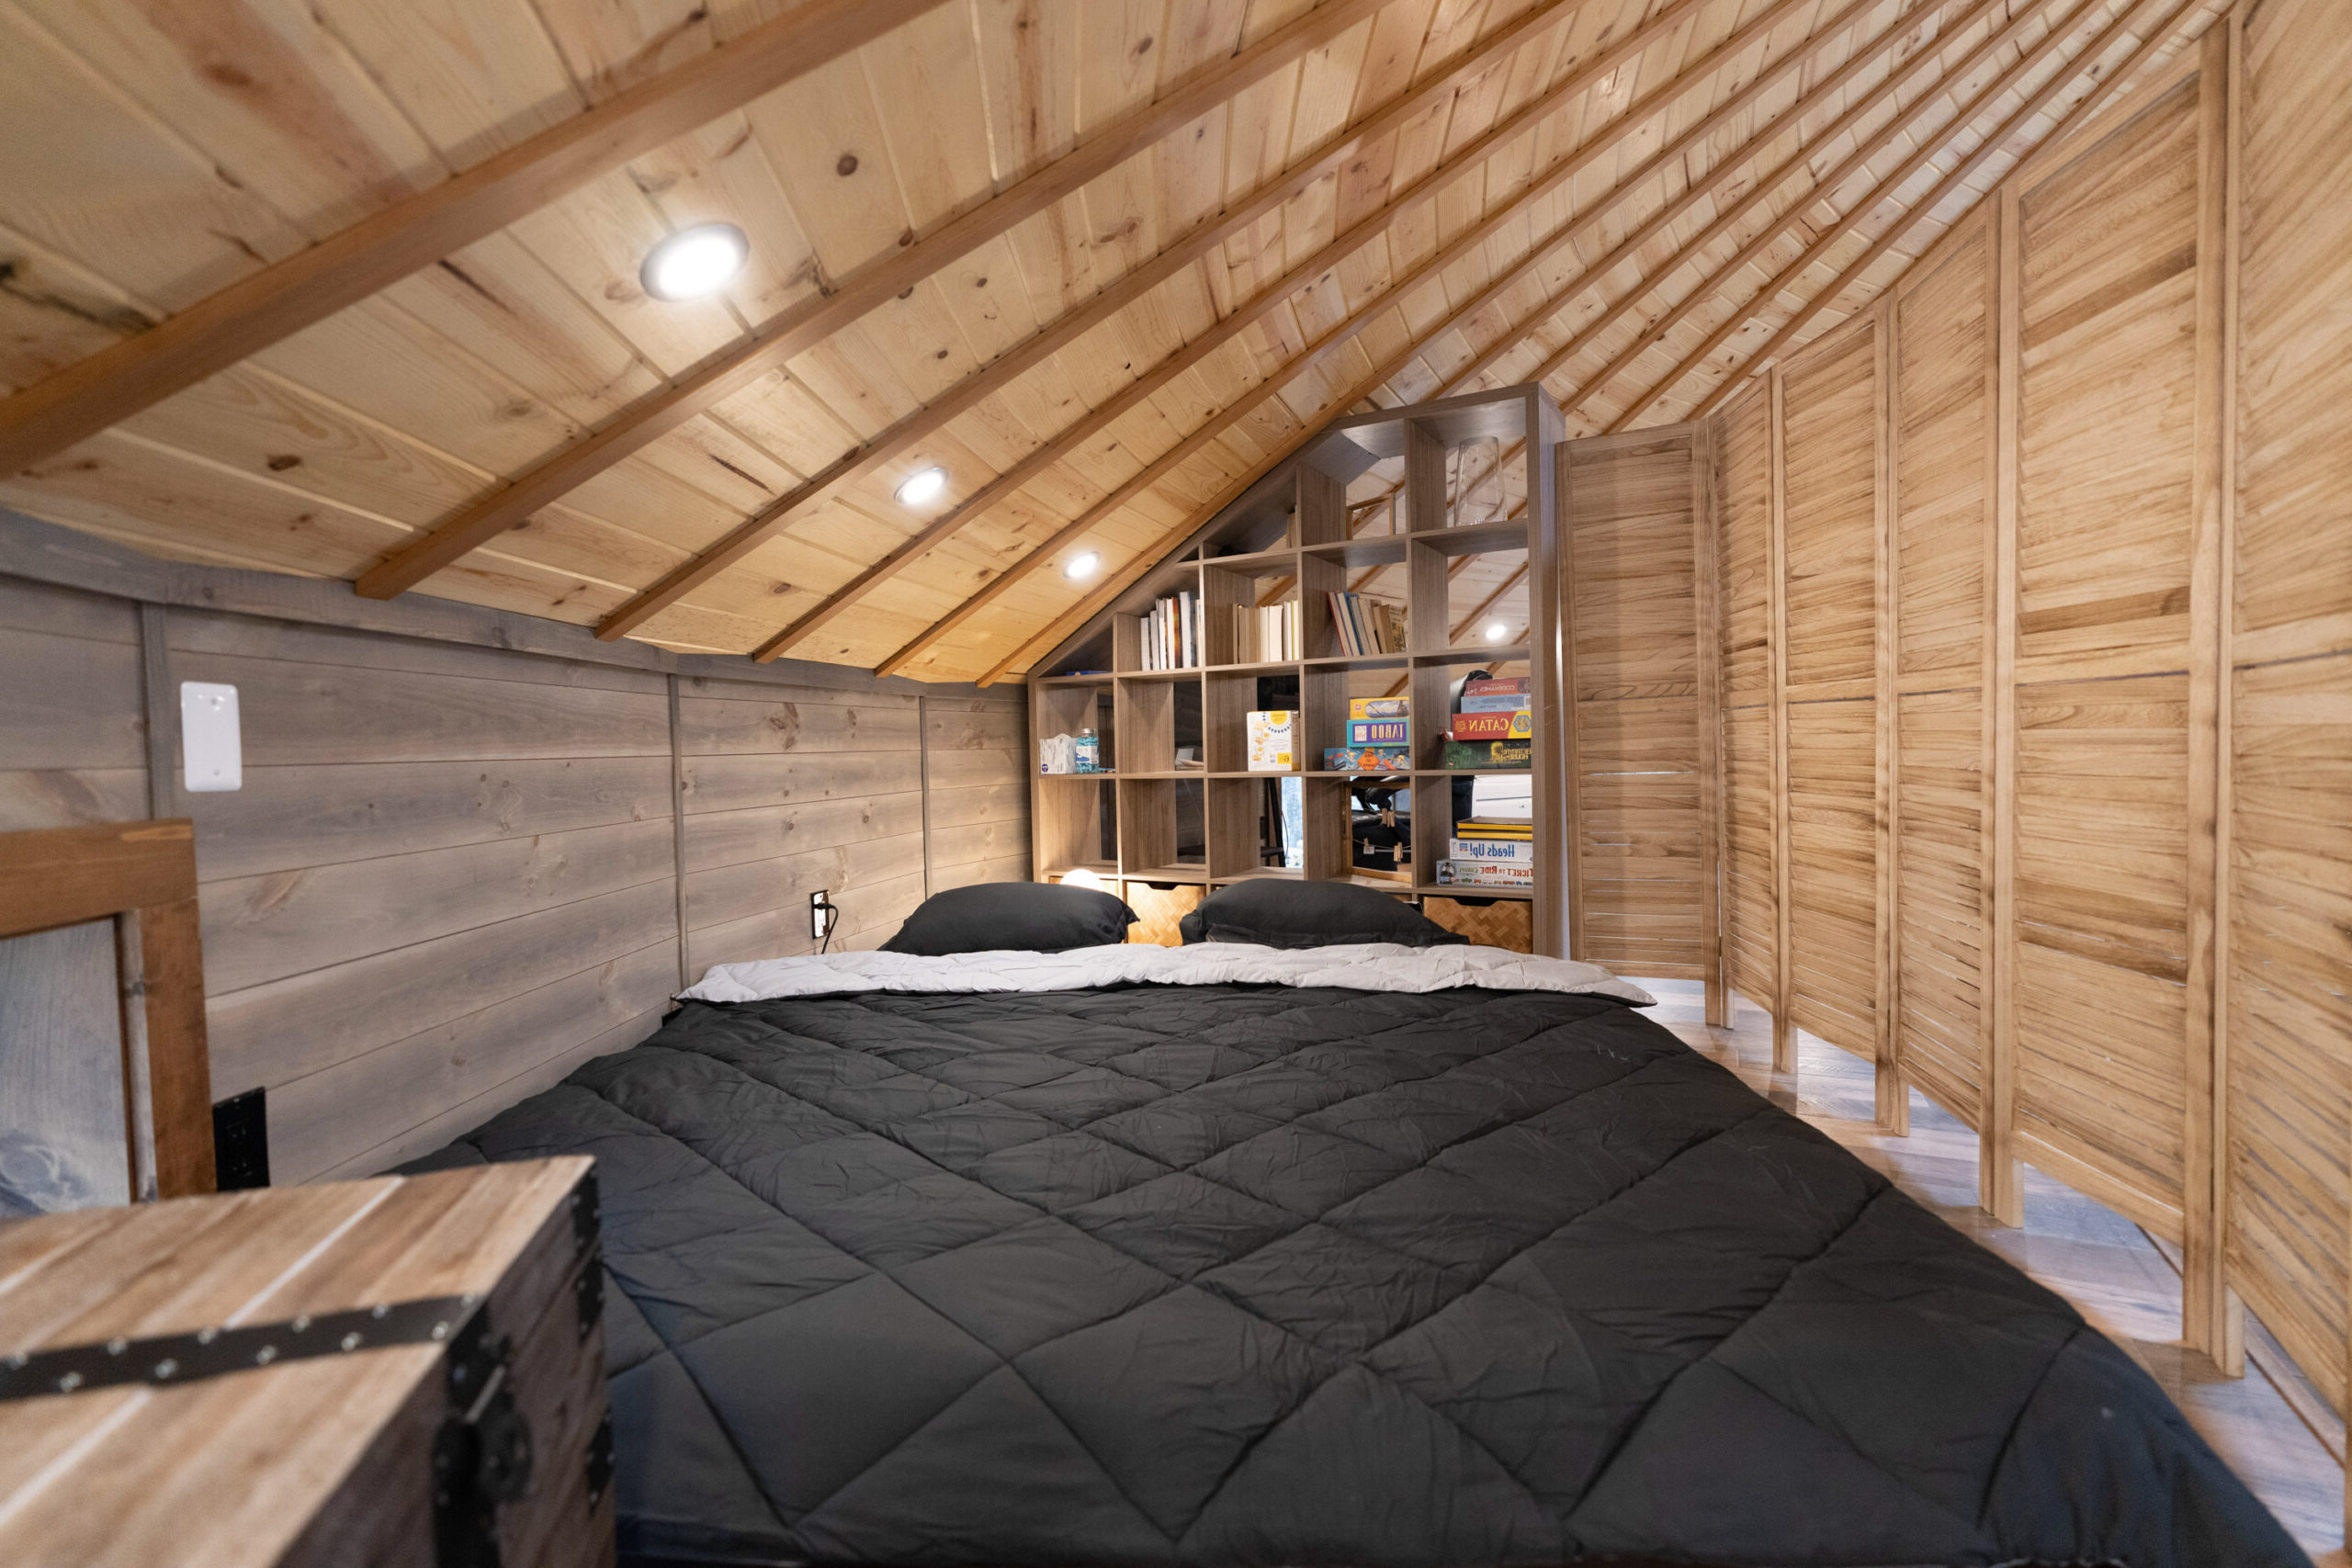 Floor sofa transformed into KING size bed with a privacy screen -- Skyline Yurt, Skyline Cabin